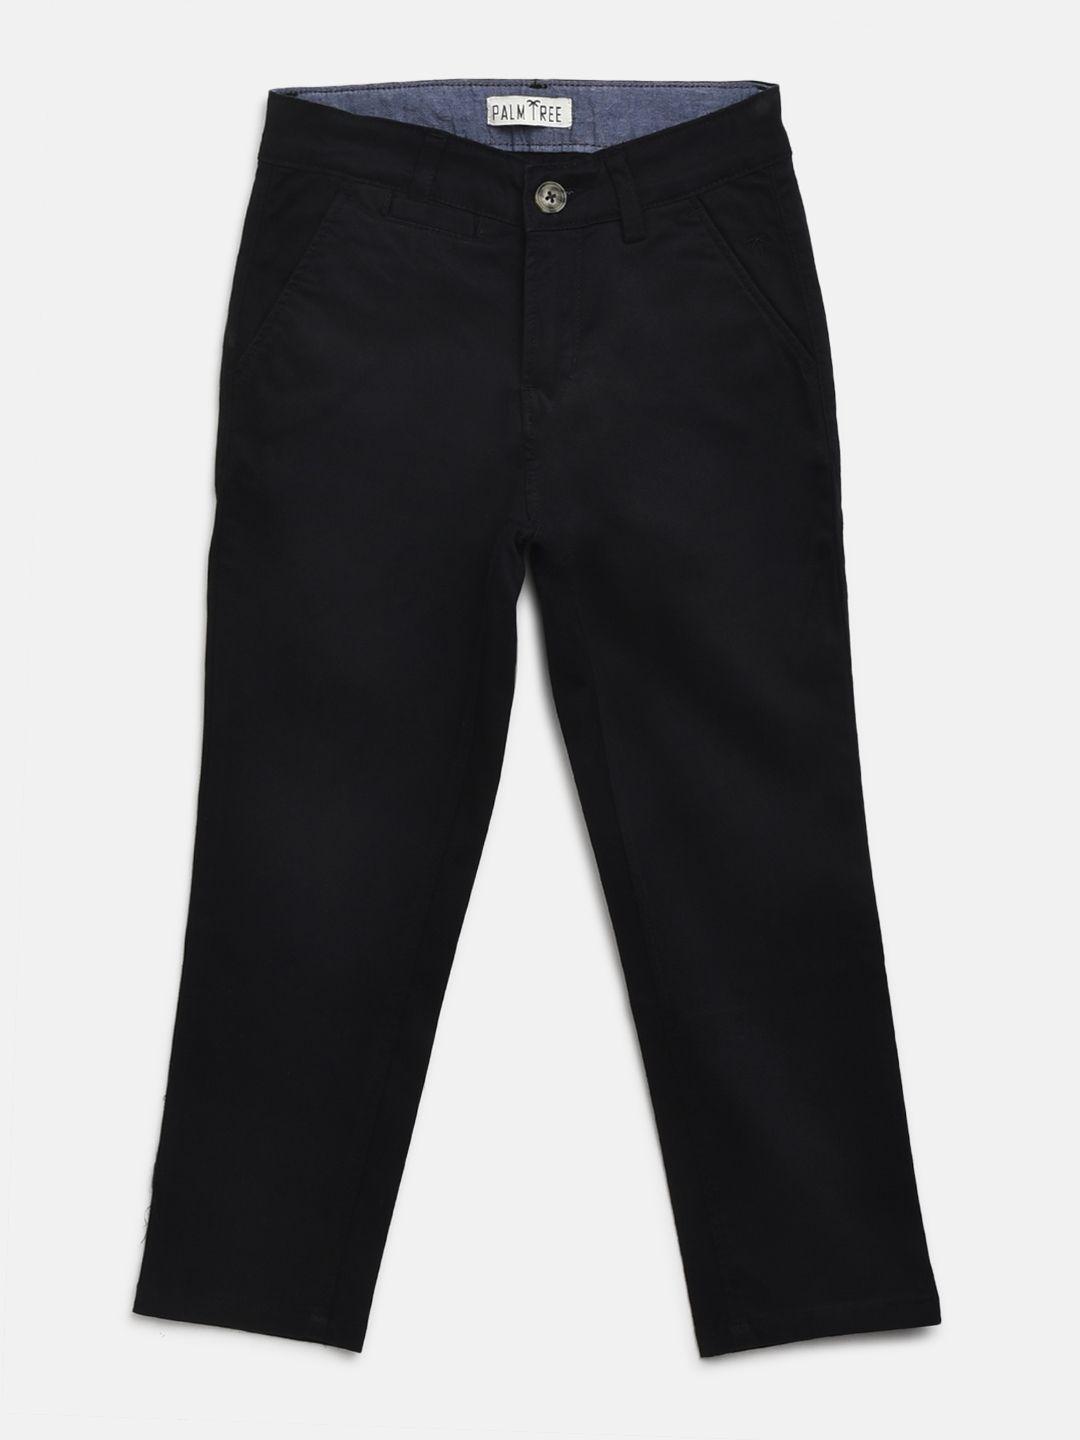 palm-tree-boys-black-regular-fit-solid-trousers